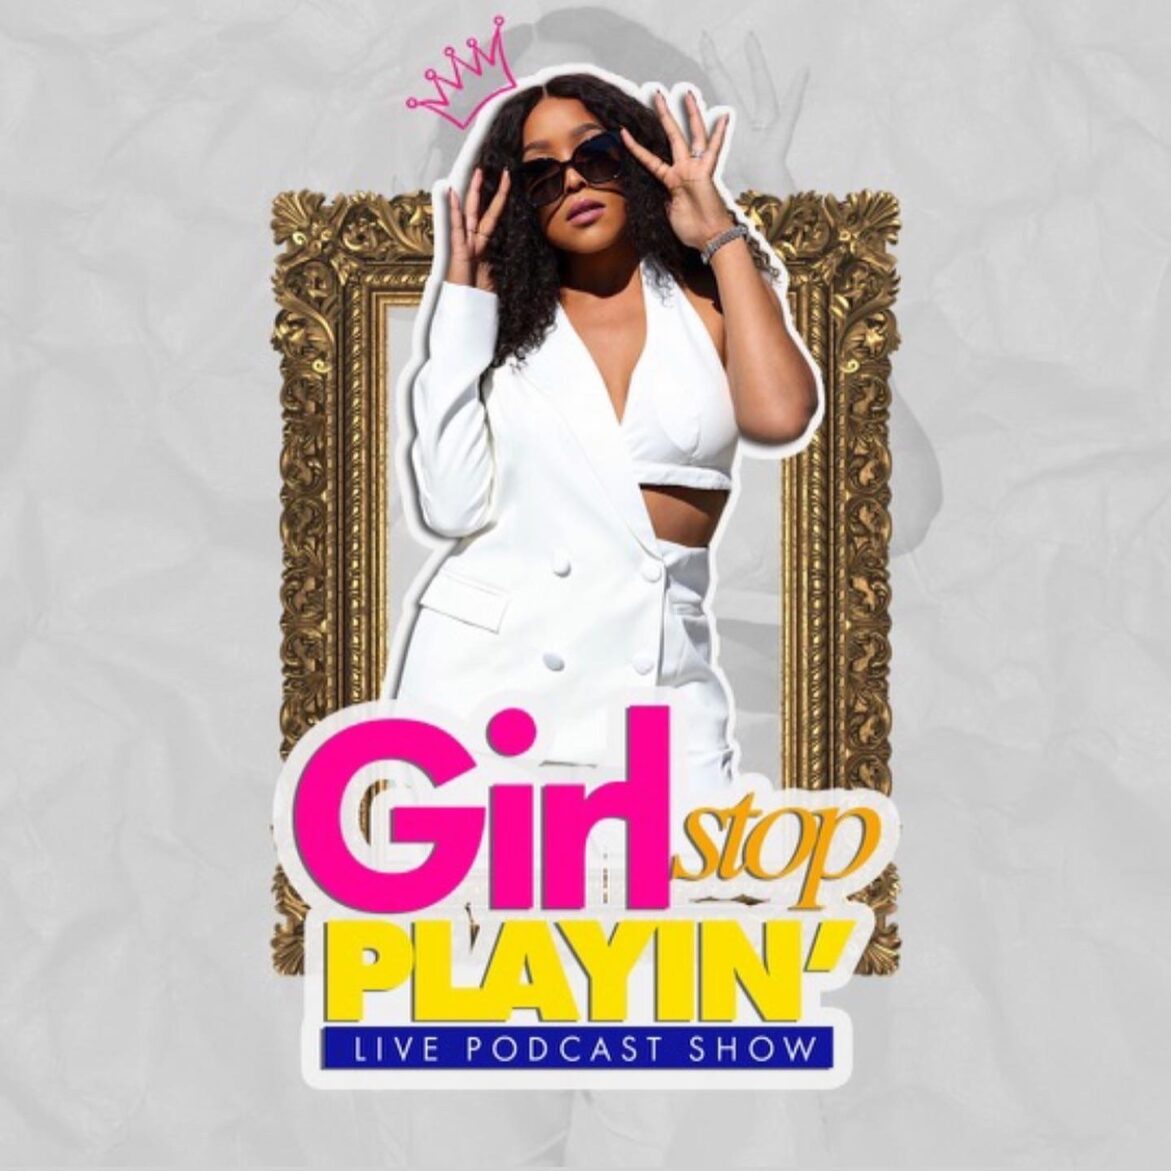 Black Podcasting - Ask Koe: 5 Simple Solutions For Single Women | Koereyelle | Girl Stop Playin' Podcast-Episode 5